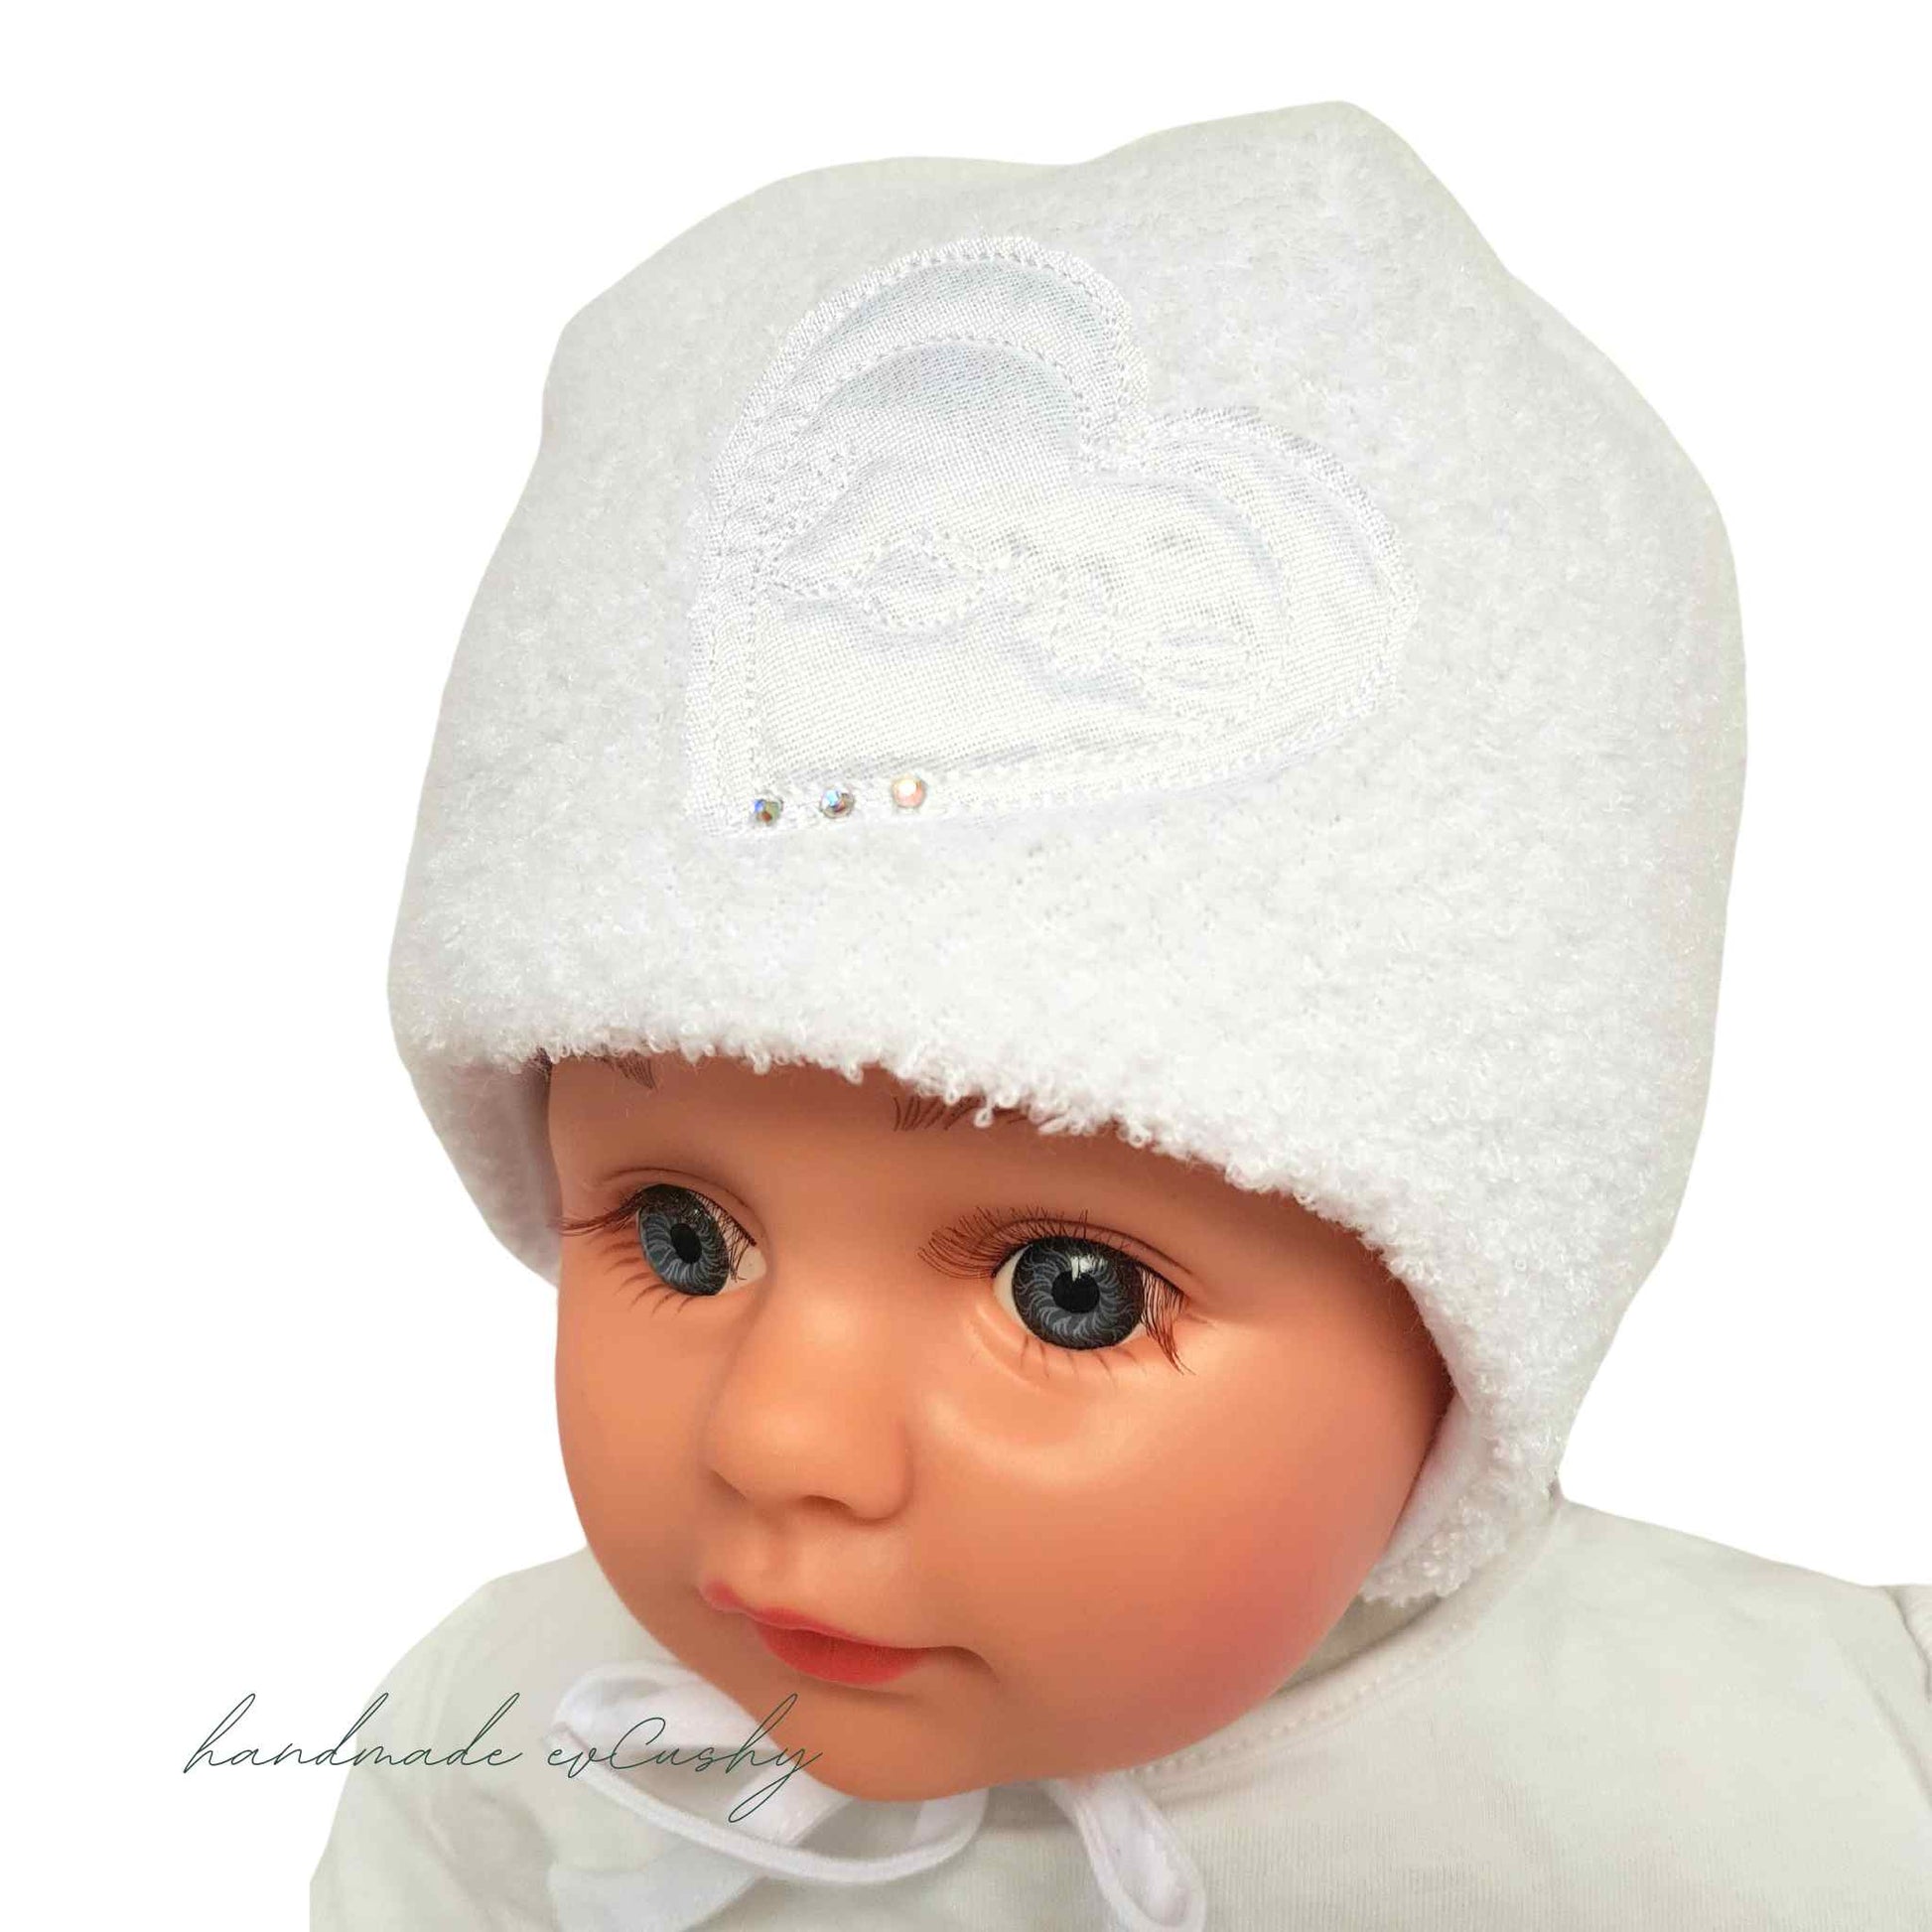 warm white hat for winter for baby girl bonnet like with heart embelishment on front